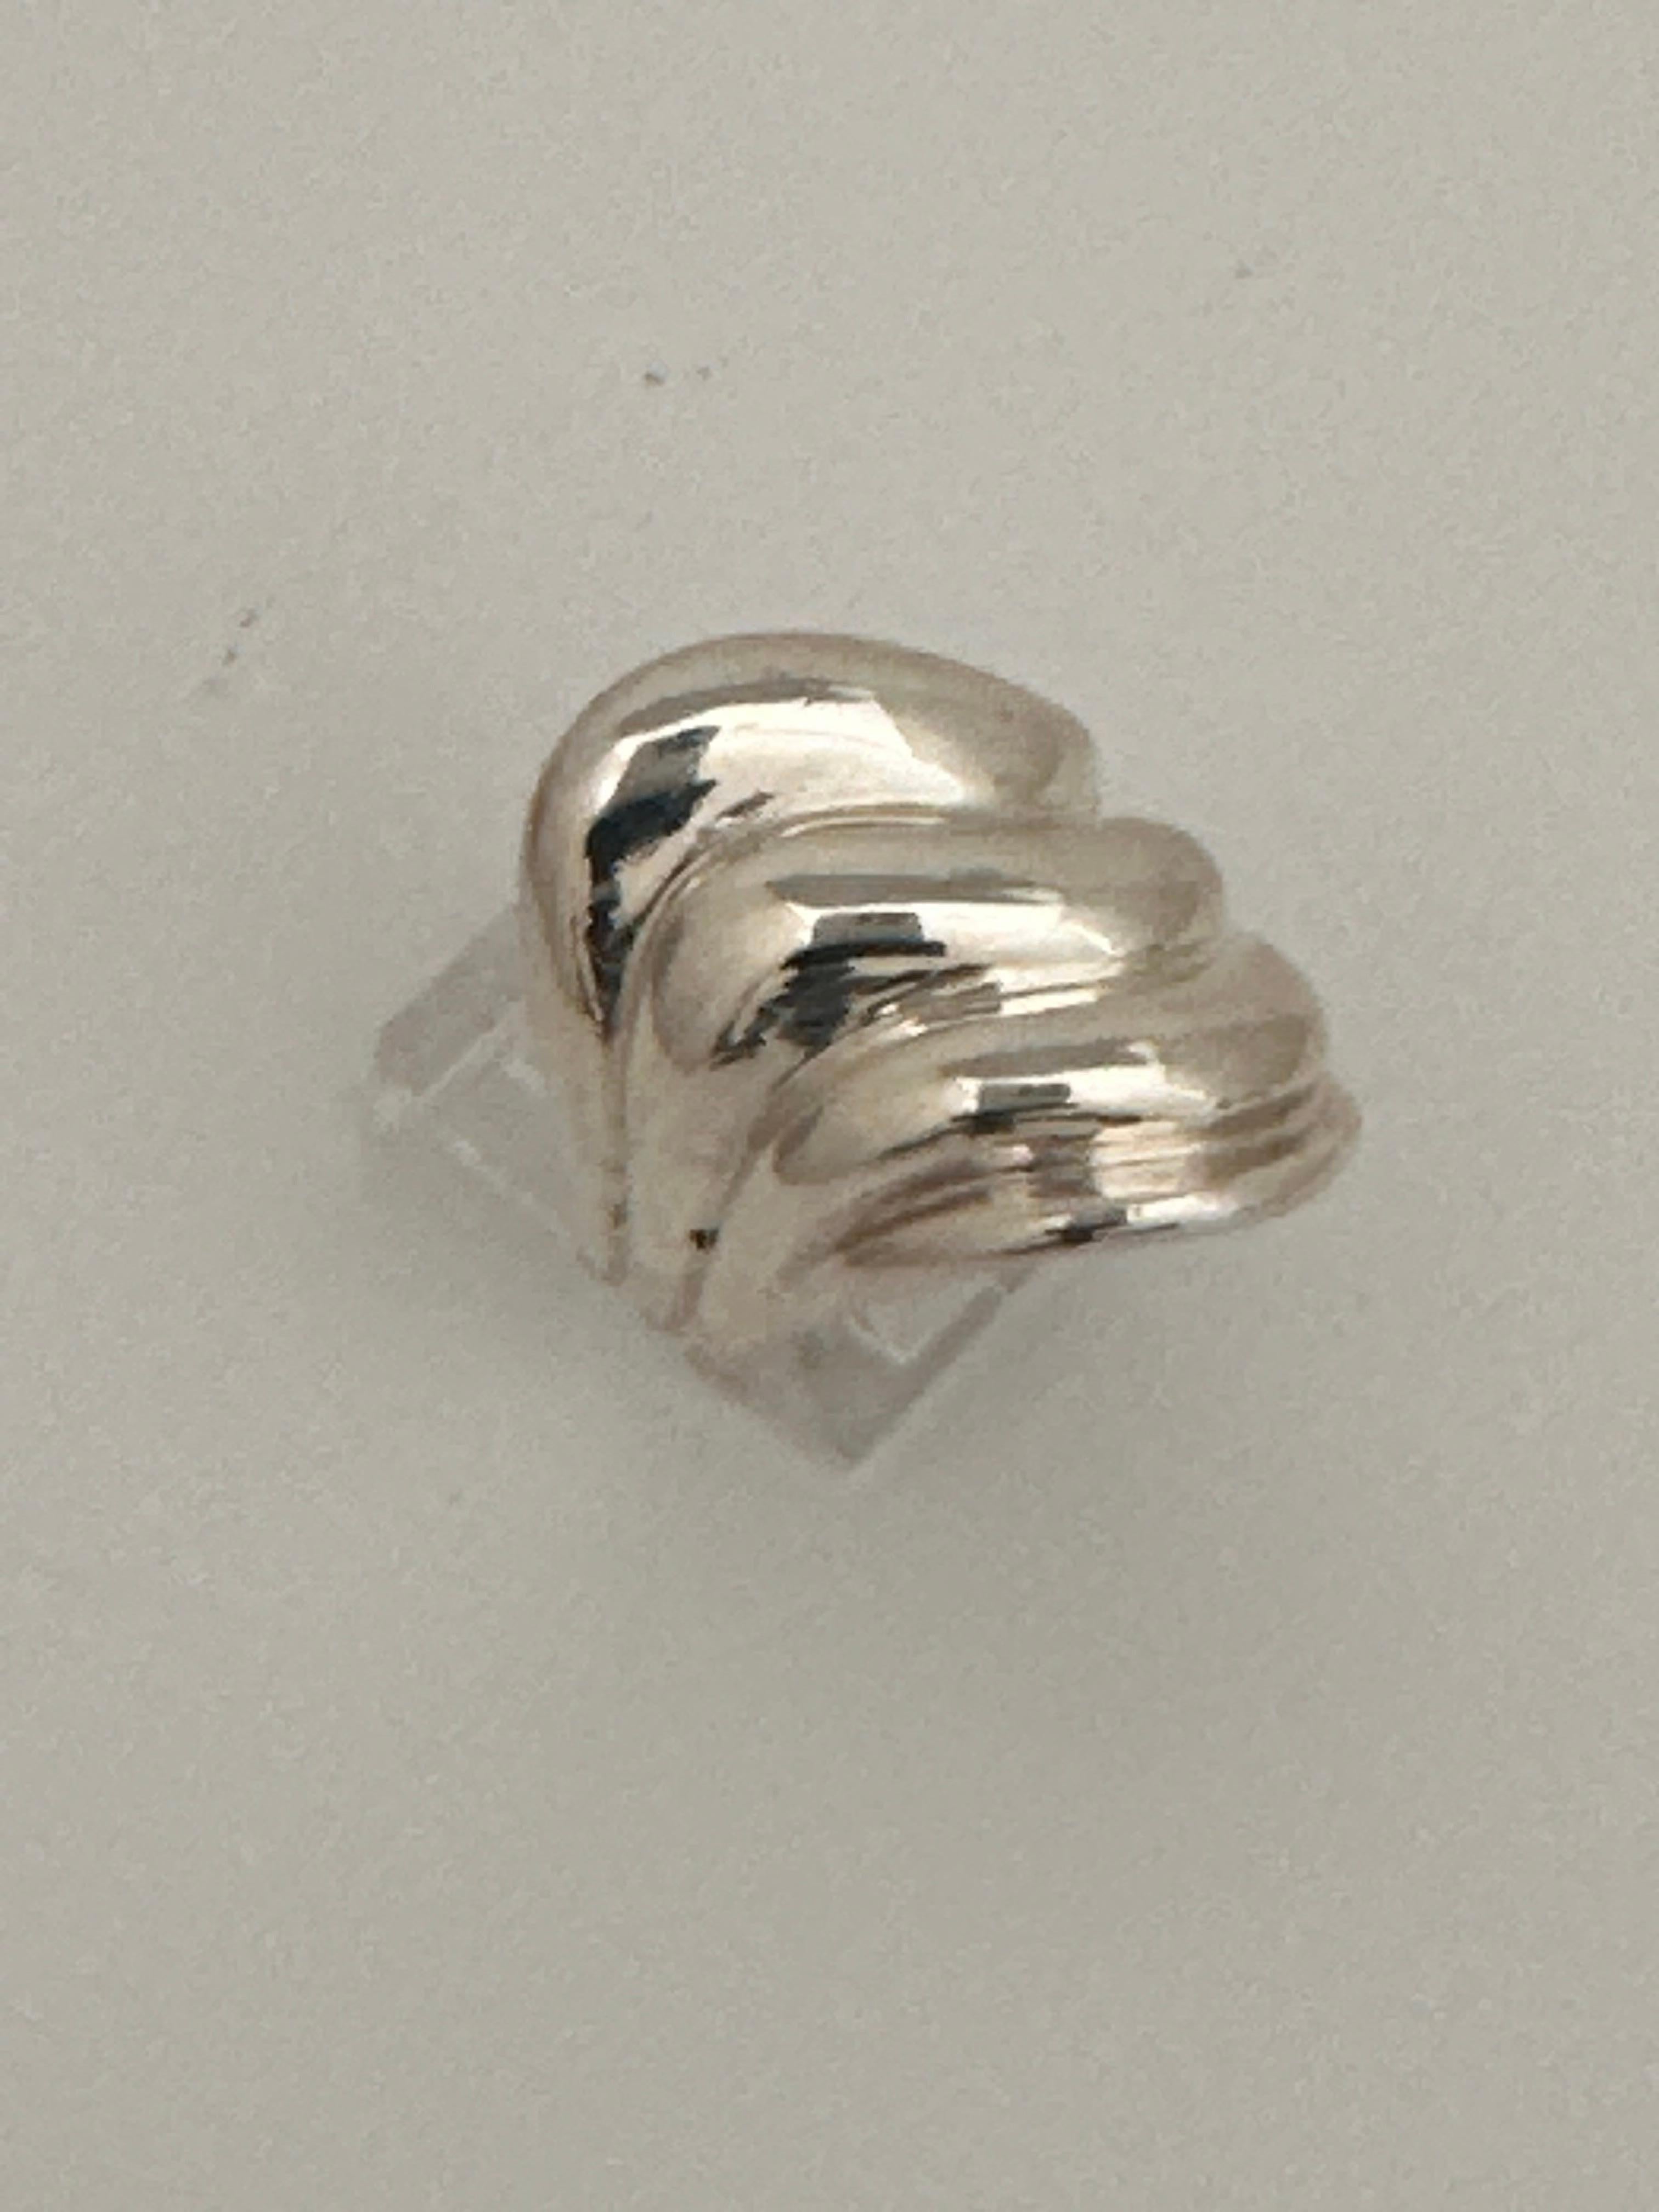 22mm ring size